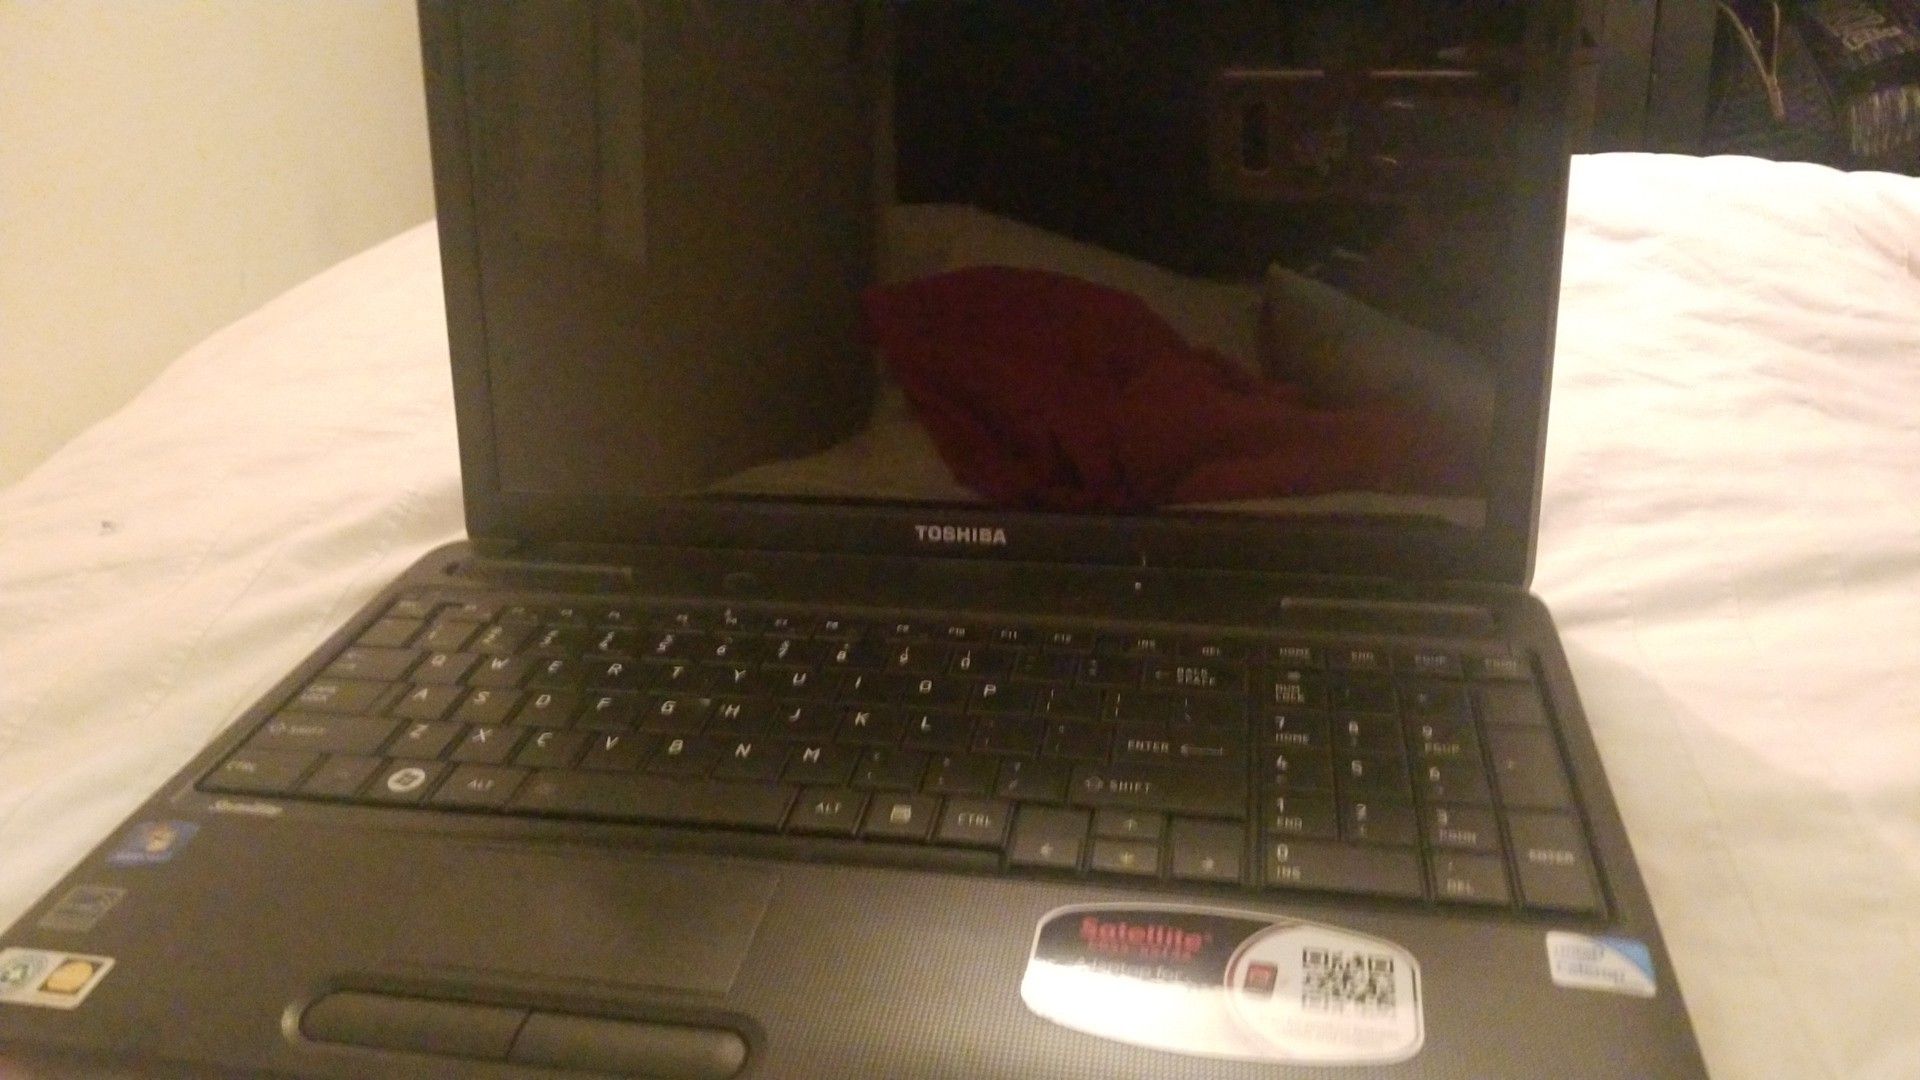 Toshiba Laptop with charger